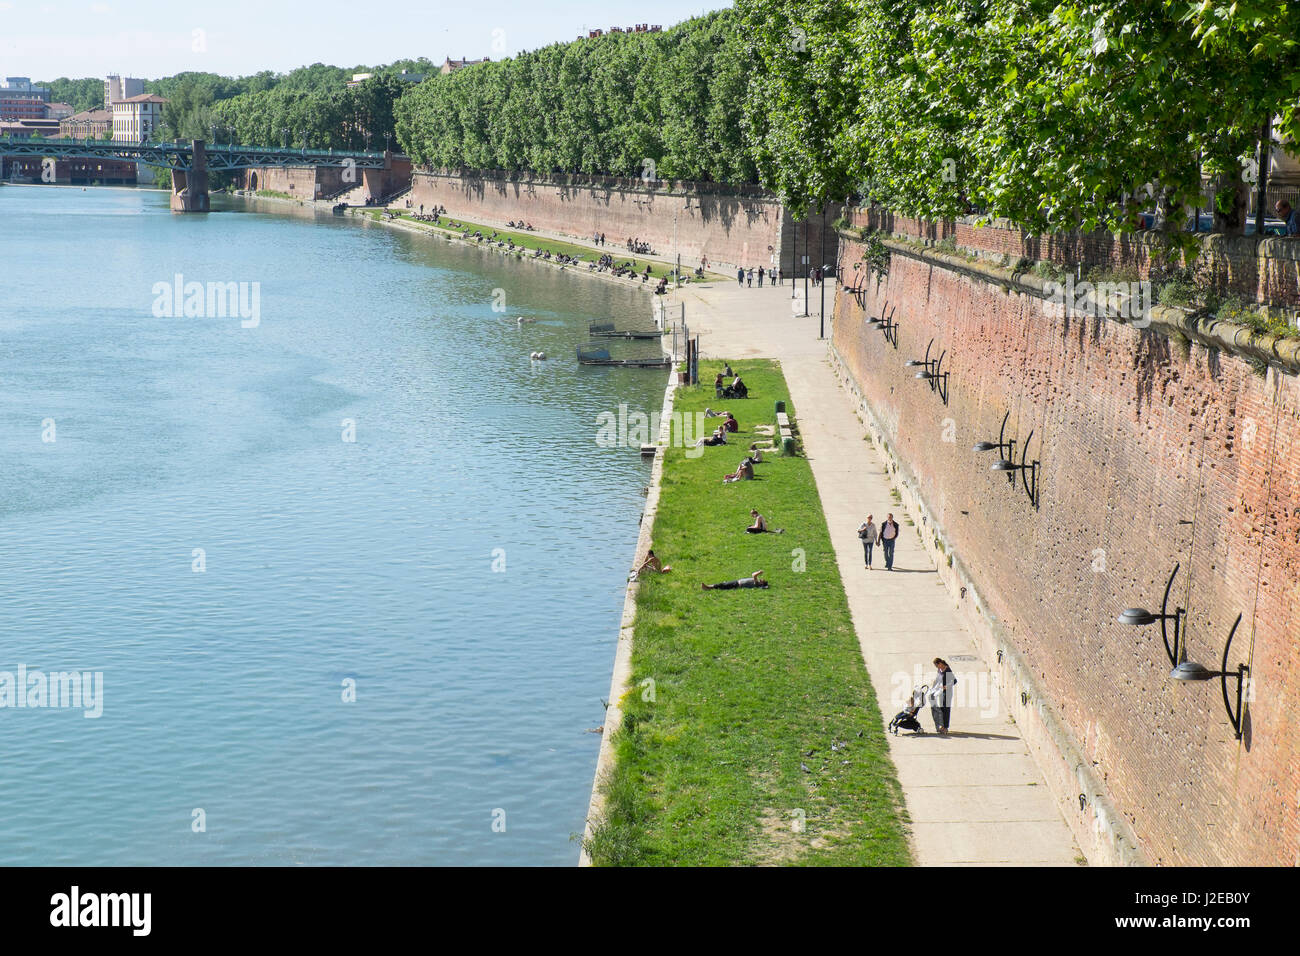 France, Toulouse, near the Pont Neuf bridge, Henri Martin promenade adjacent to the Garonne River, young couples share time together and individuals lie in the sun looking at their cell phones. Stock Photo